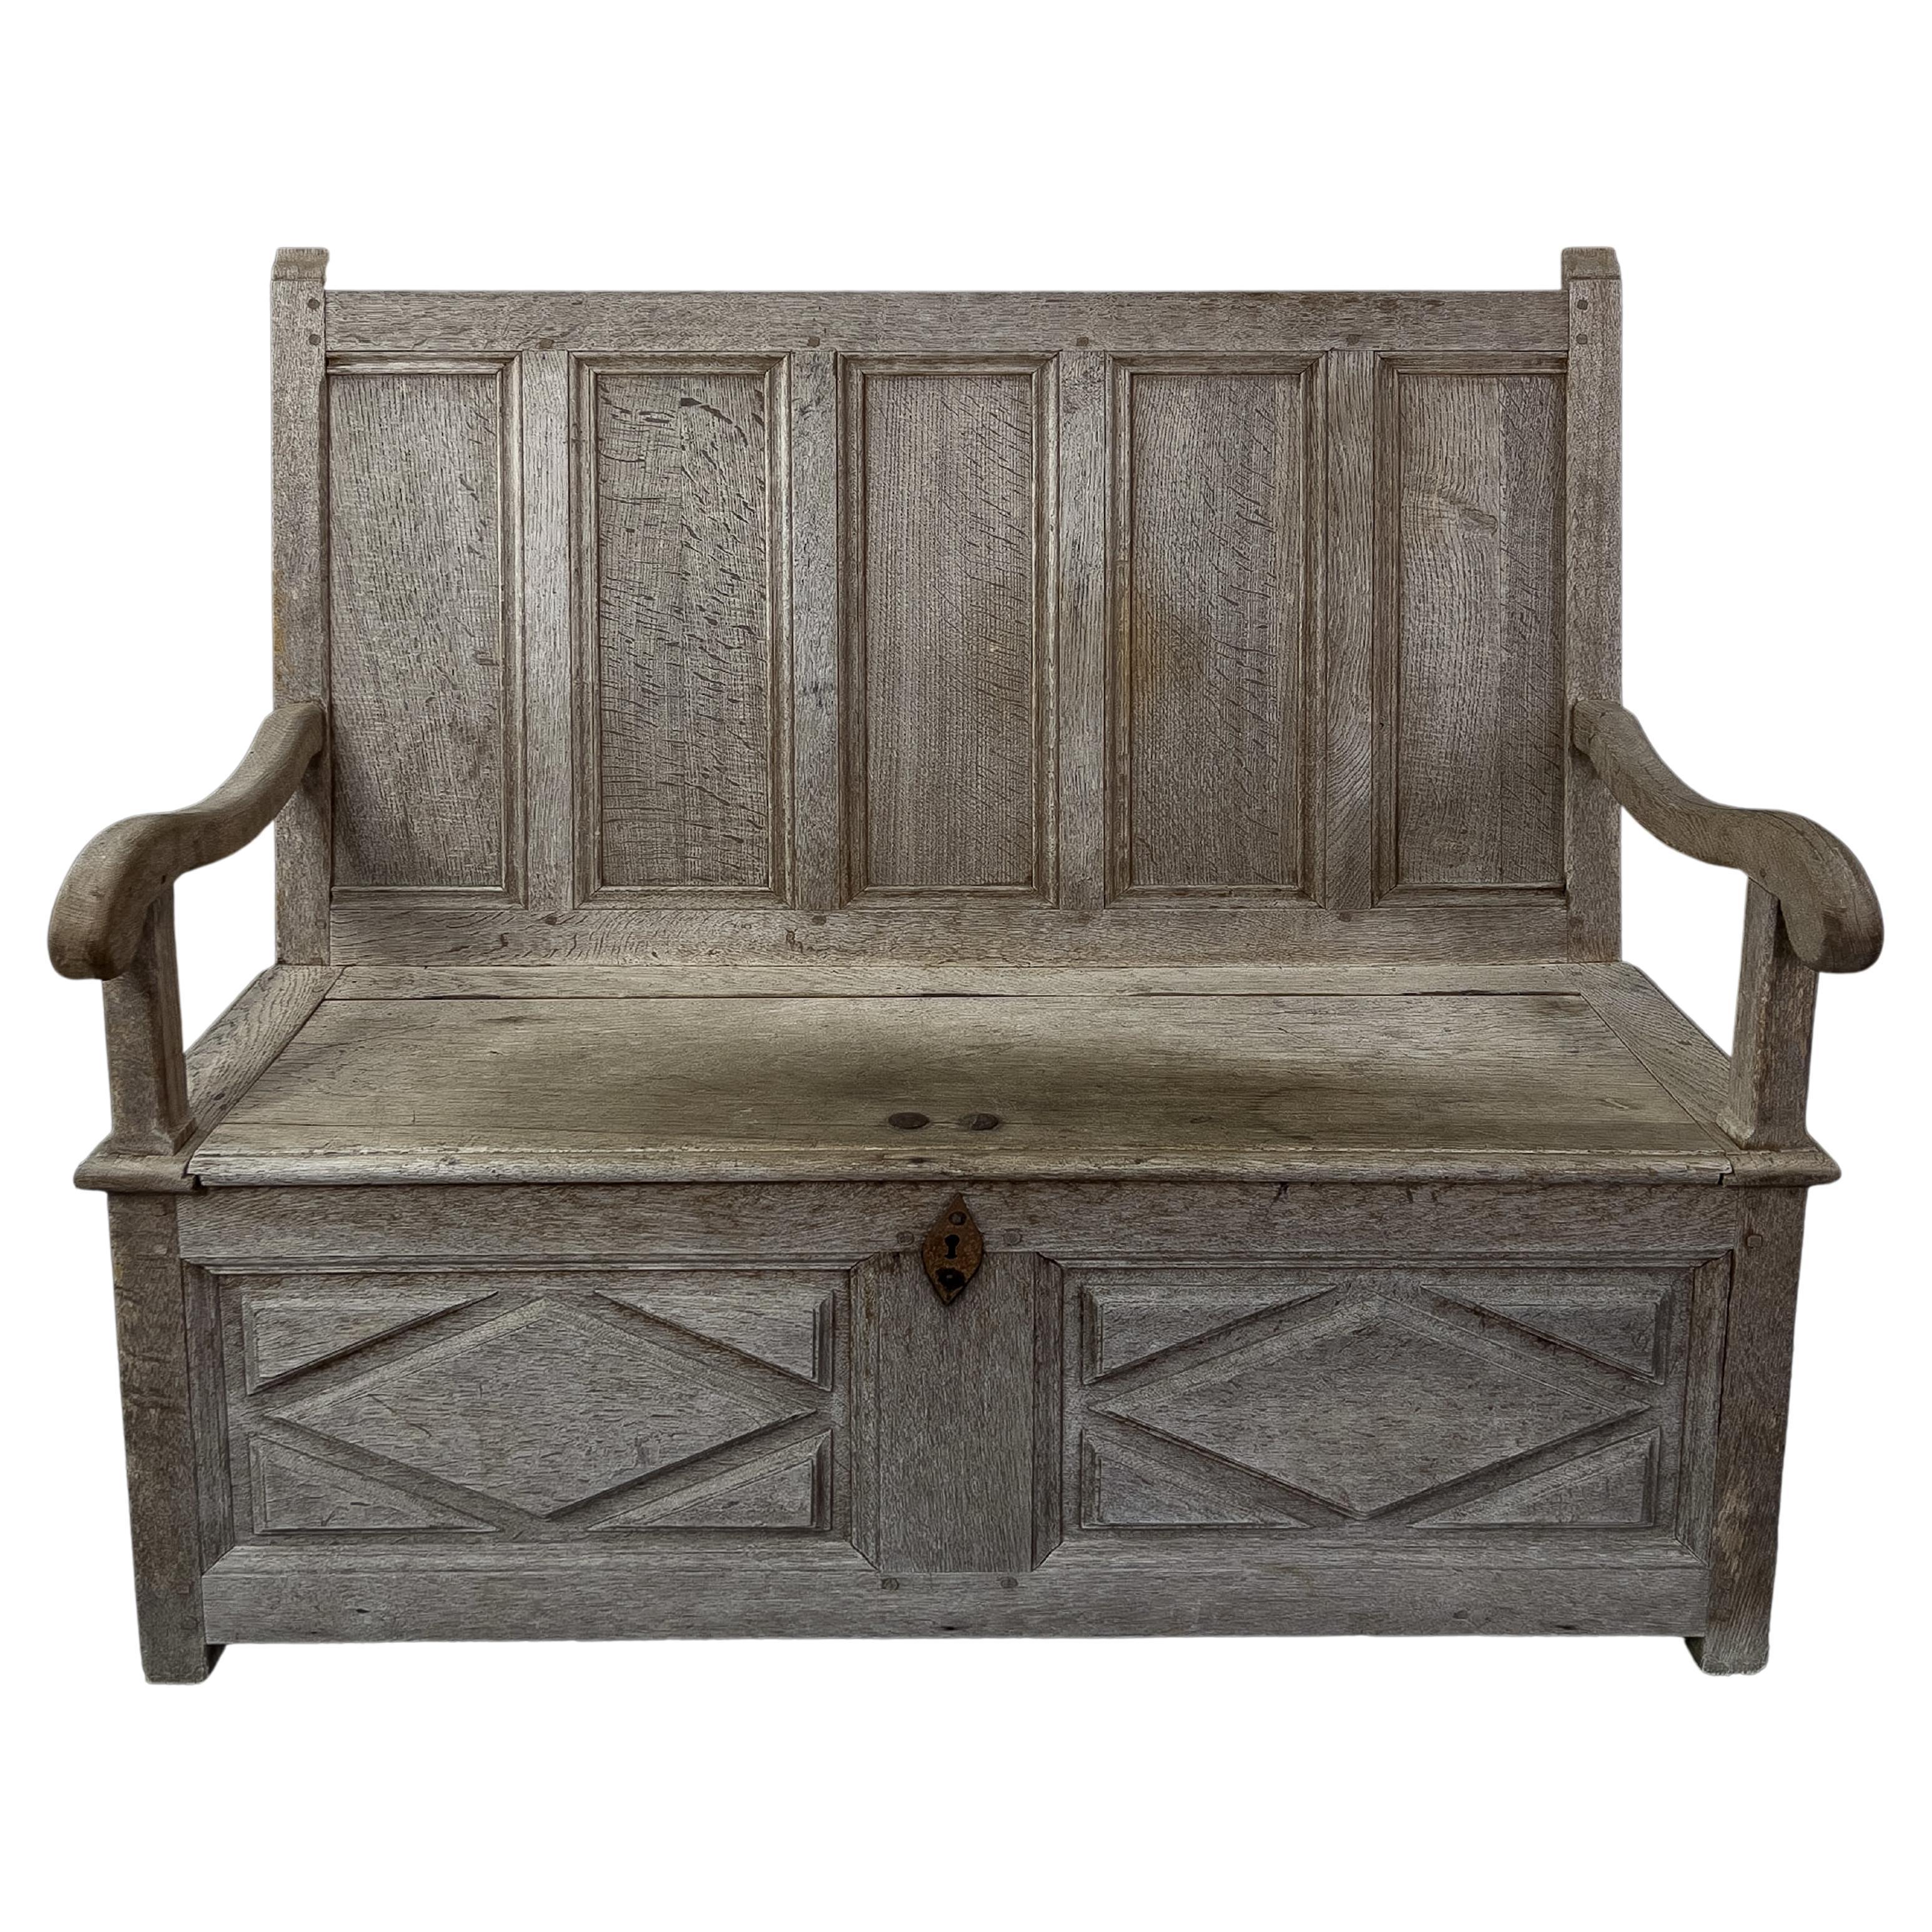 19th C. Bleached English Oak Carved Settle Bench